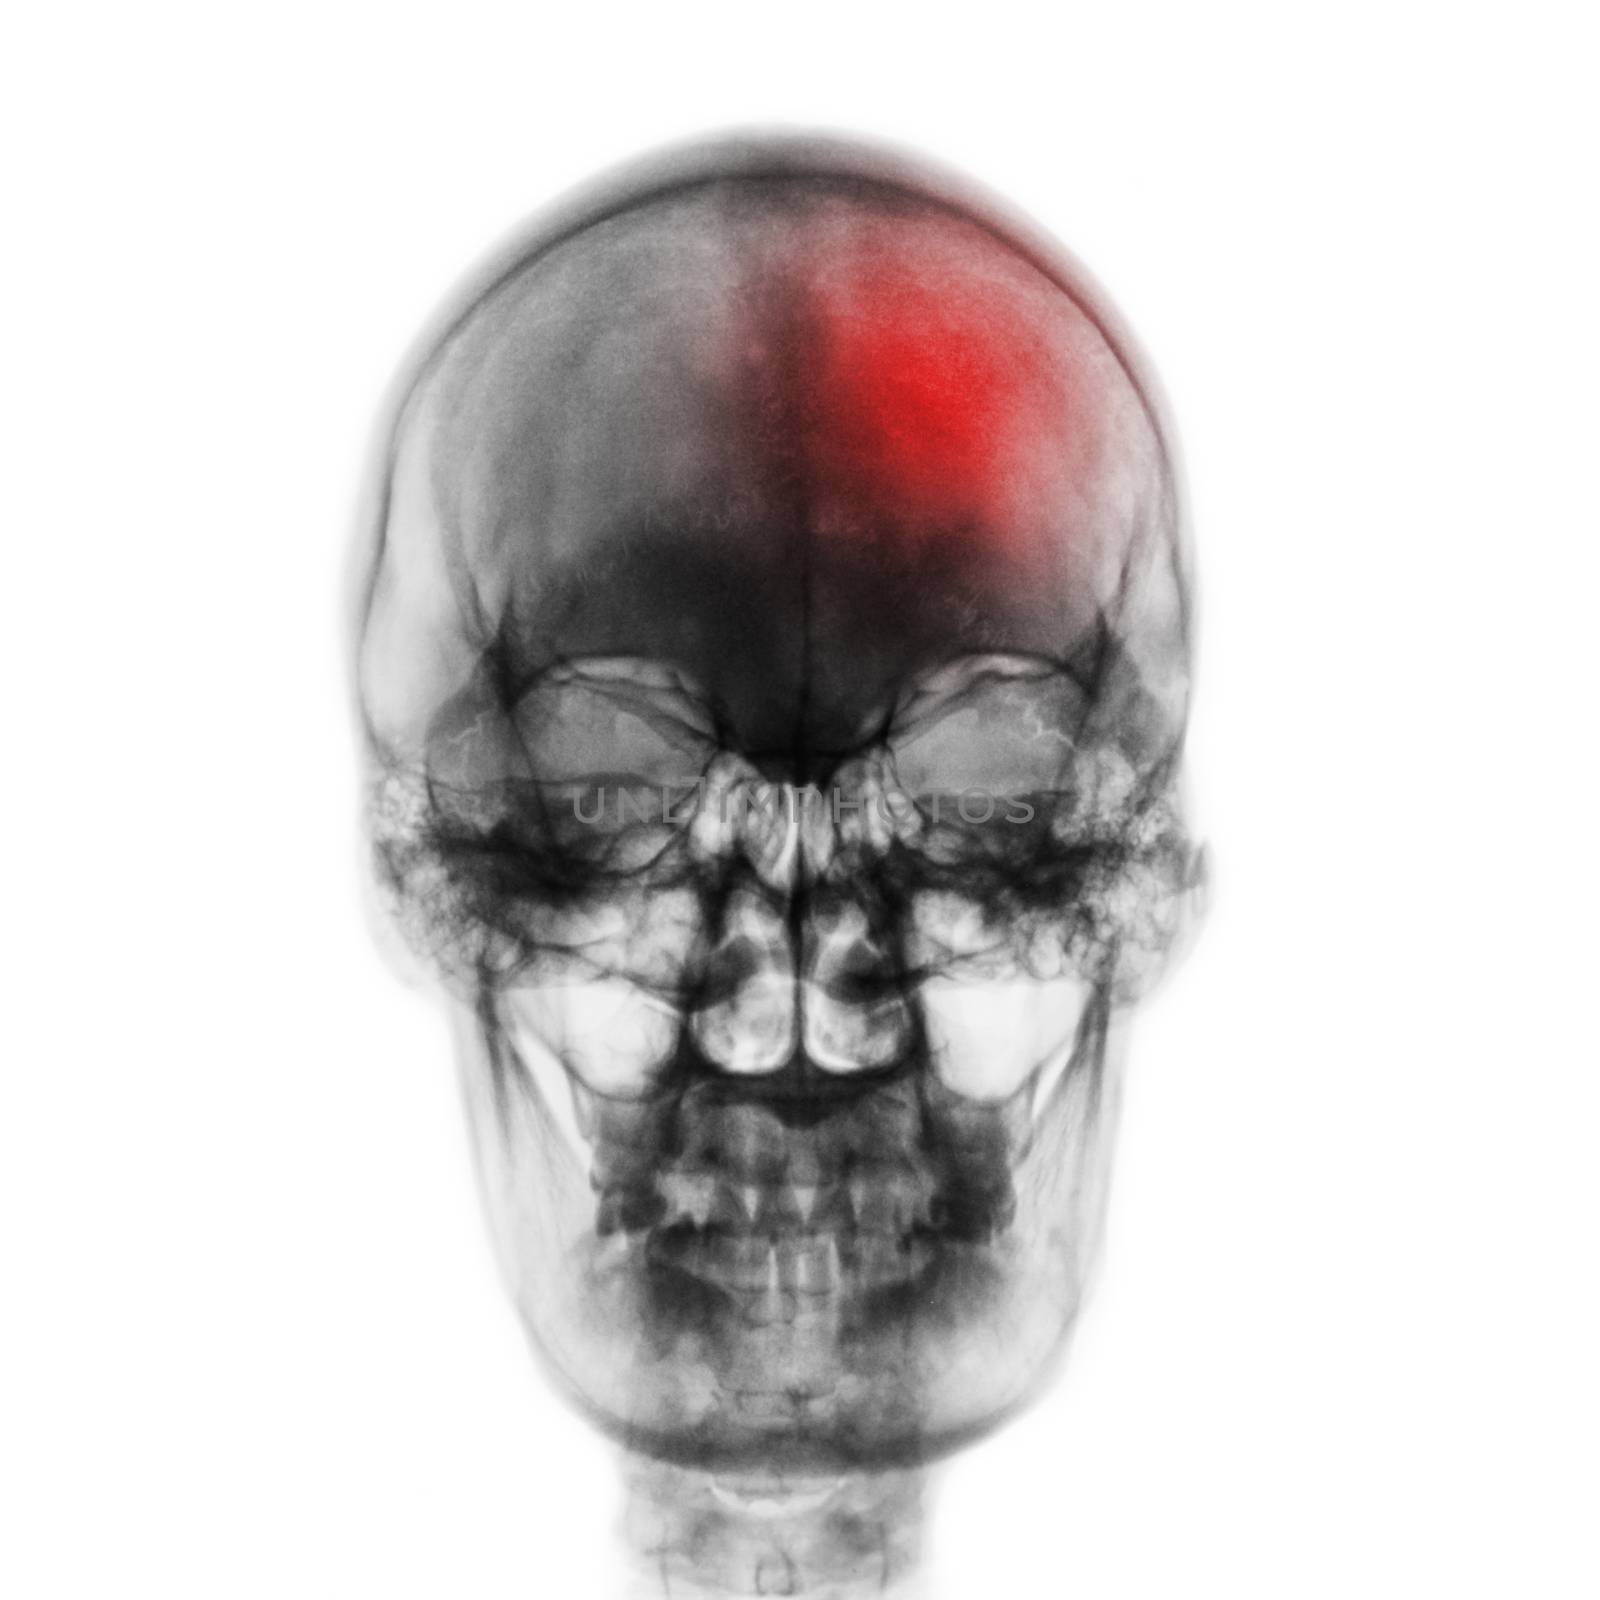 Stroke ( Cerebrovascular accident ) . Film x-ray skull of human with red area . Front view by stockdevil